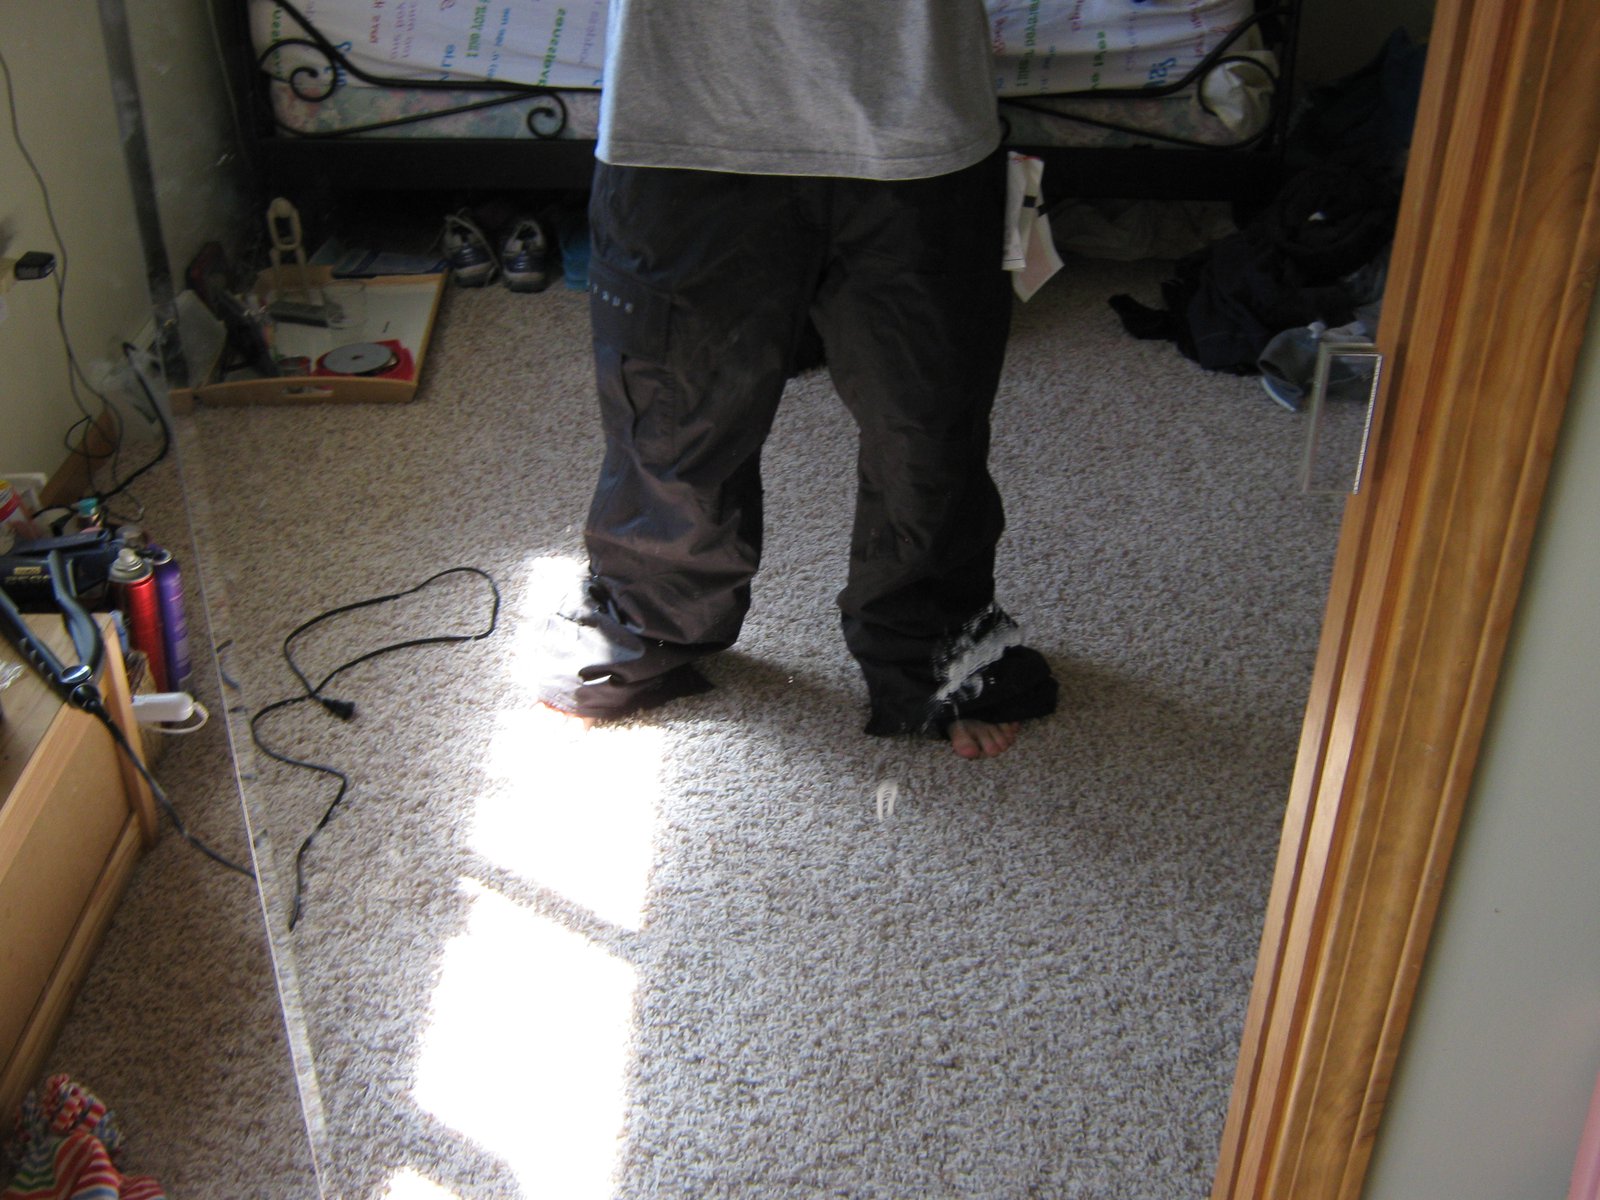 Anothe front veiw of the pants.